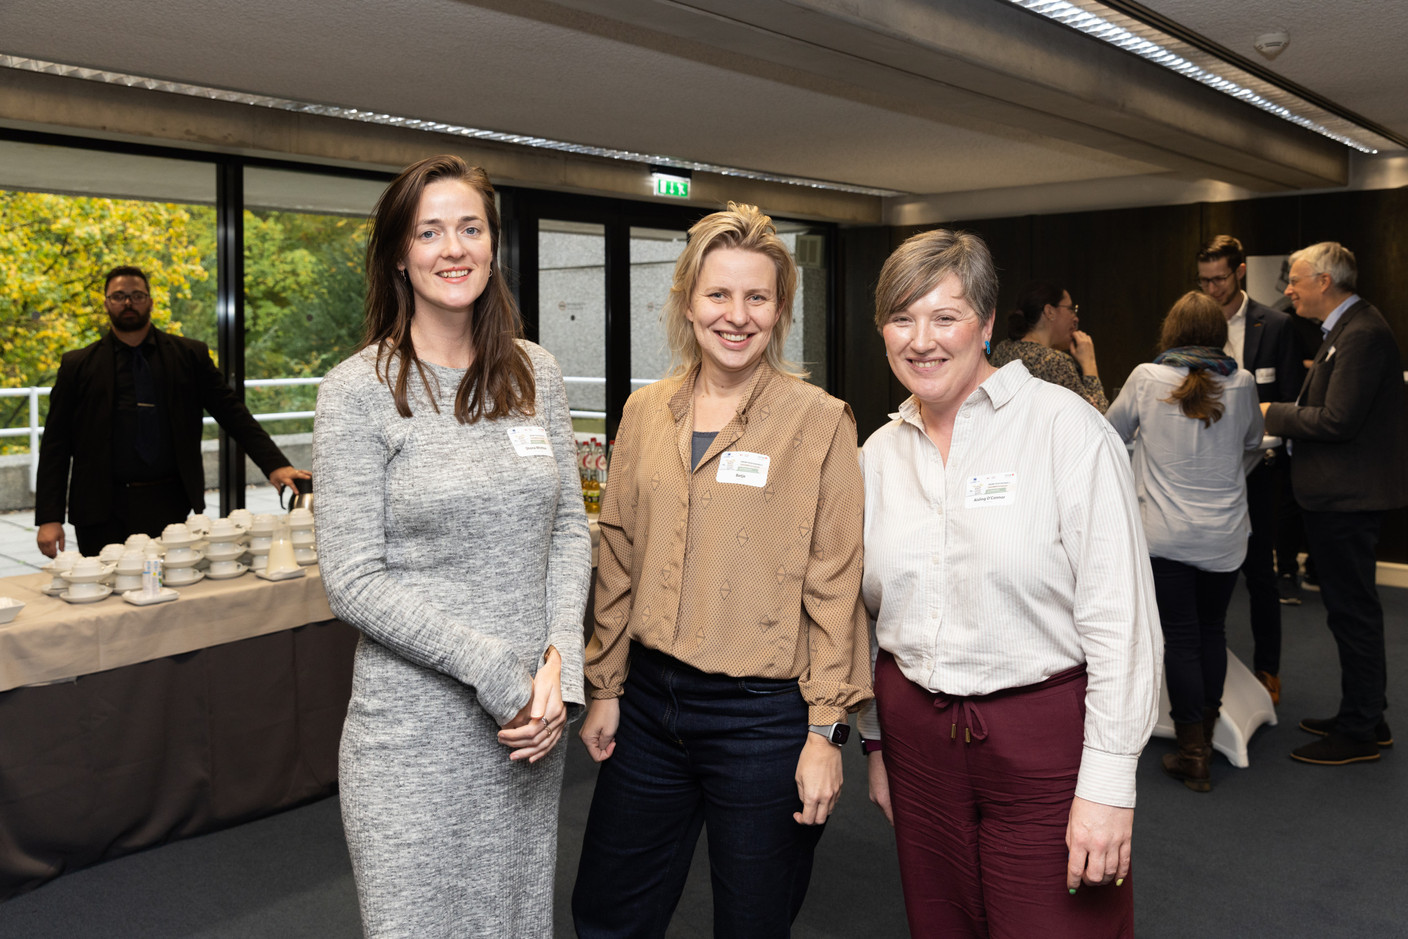 (l-r) Shona Whitton, Betje and Aisling O’Connor during the networking event at the ‘community disaster preparedness’ conference at EIB headquarters in Kirchberg on 26 October 2023. Photo: Romain Gamba / Maison Moderne